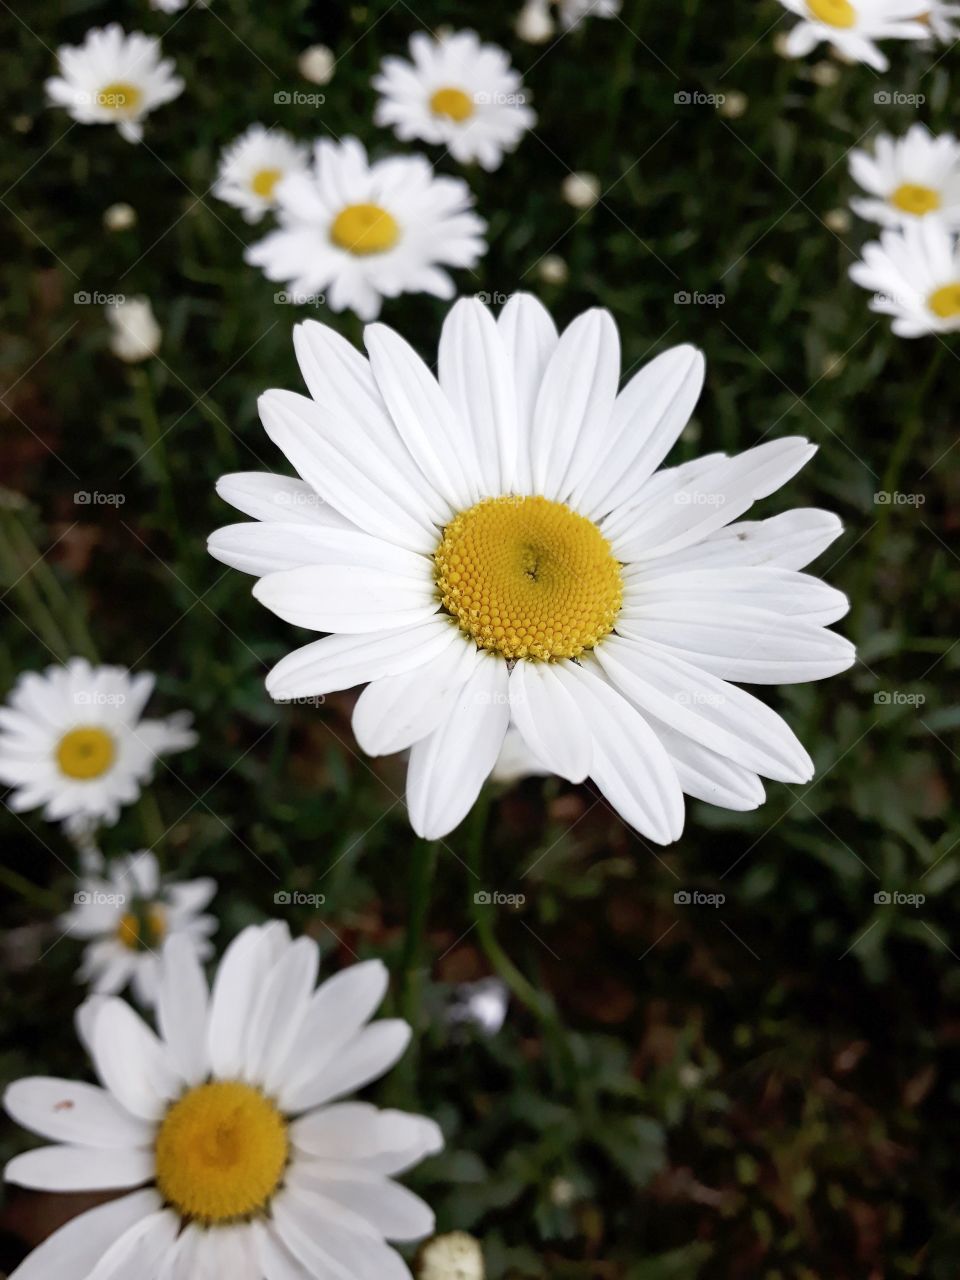 Flower photography, Daisy in bloom, in Manipur, India